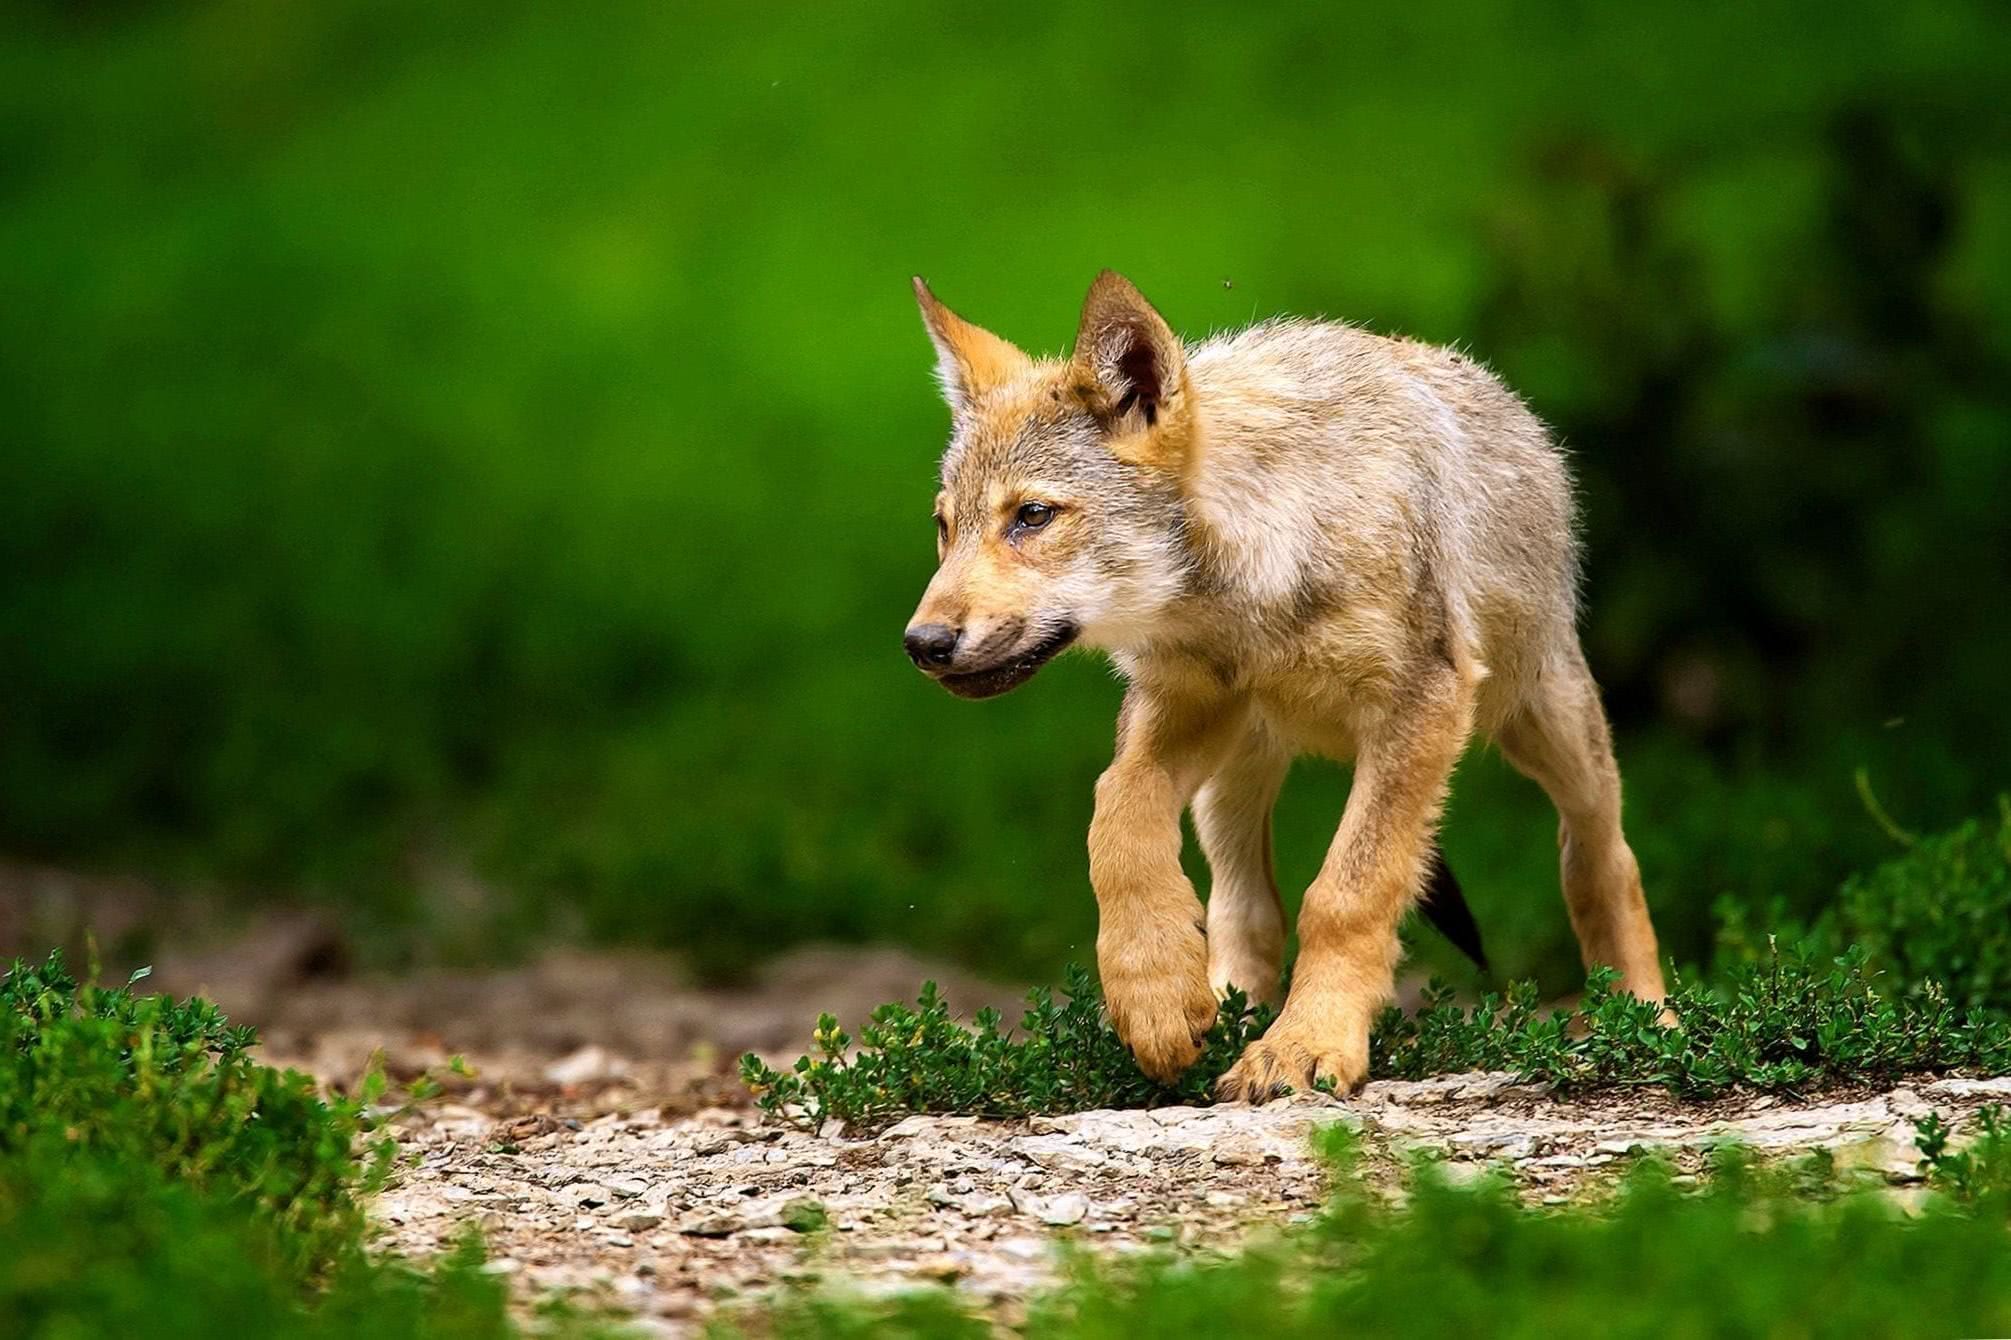 Baby Wolf Wallpaper and HD Background free download on PicGaGa